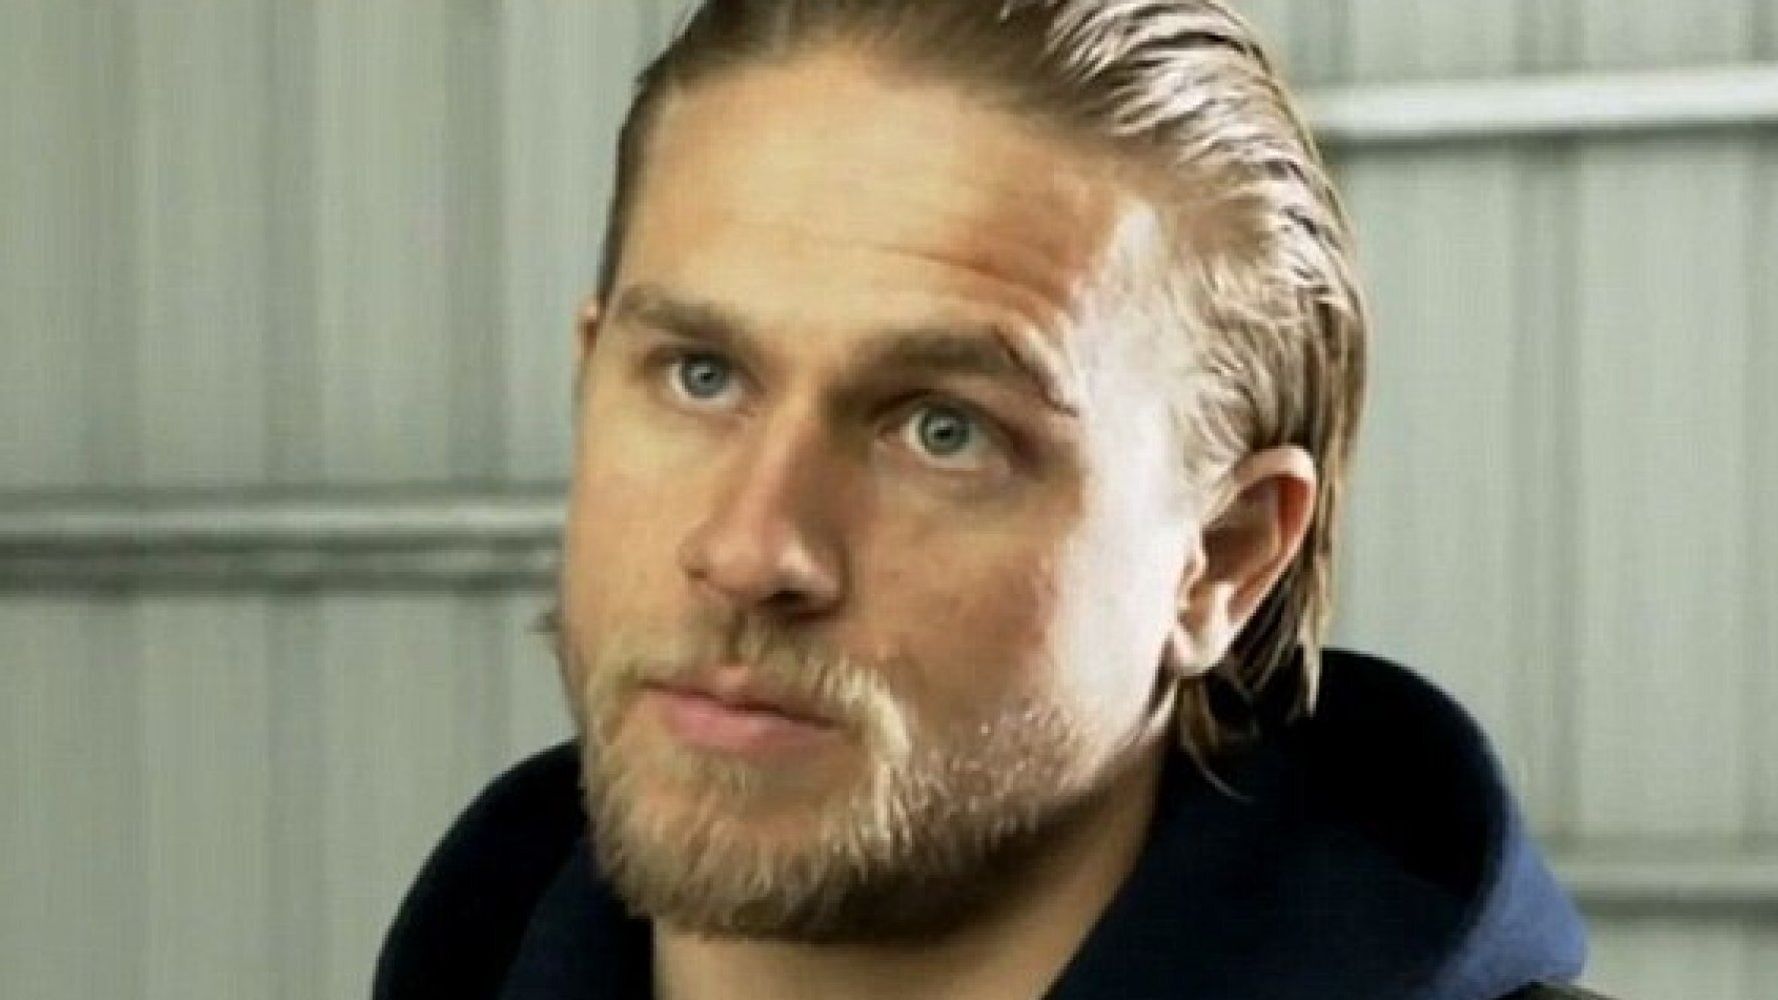 Sons of Anarchy: How Will Jax Handle His Emotional Devastation?